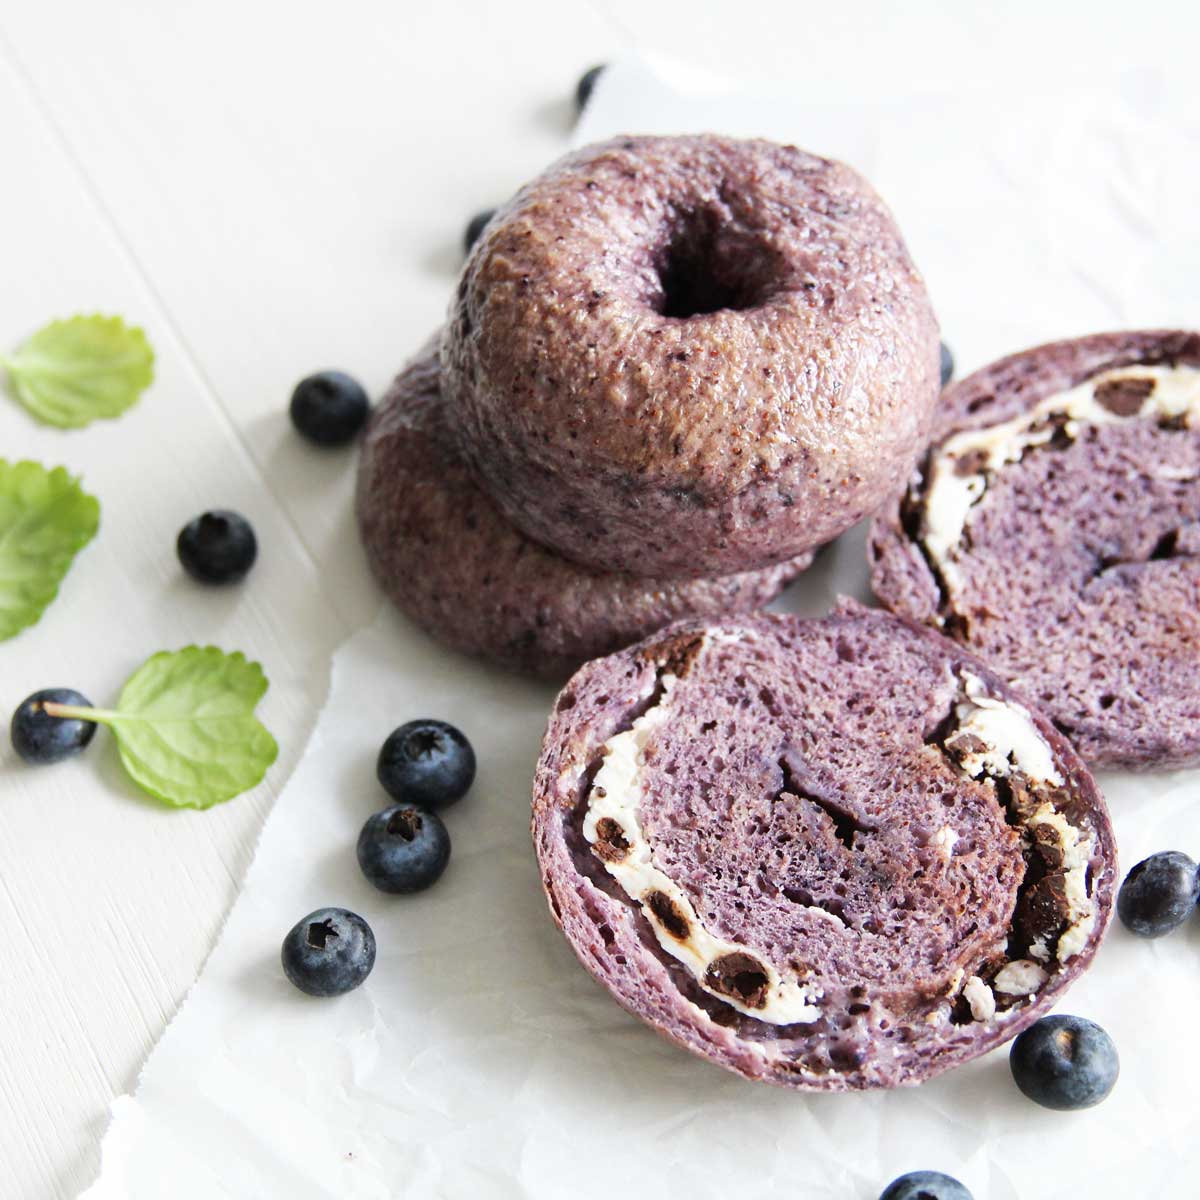 Chocolate Chip Blueberry Bagels (Easy, Cream Cheese Stuffed Bagel Recipe) - how to stuff bagels